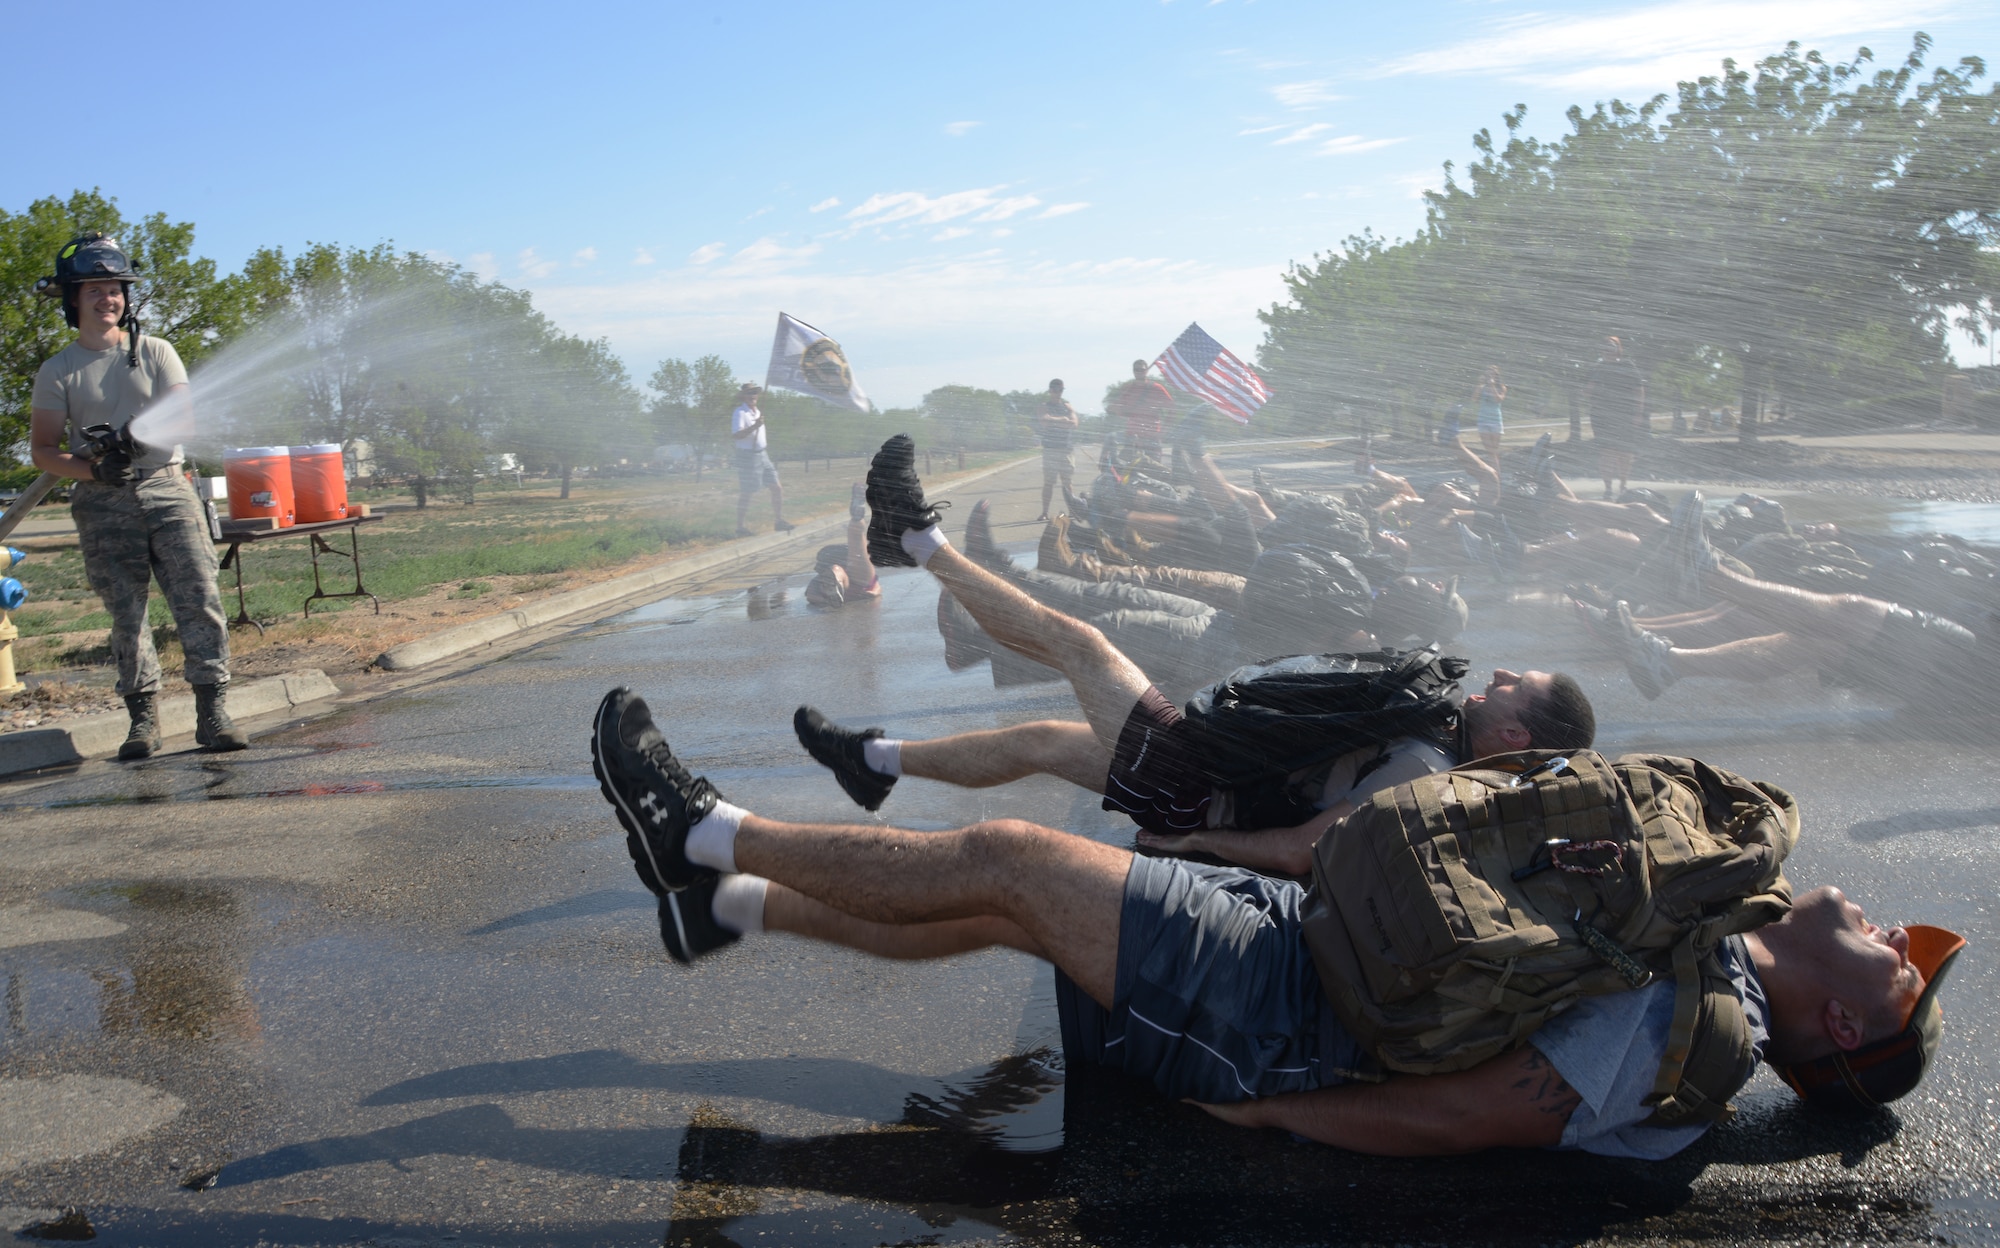 Airmen from the 366th Civil Engineering Squadron fire department use a fire hose to spray members participating in the GORUCK Light Challenge July 12, 2014, at Mountain Home Air Force Base, Idaho. Mountain Home AFB is the first of 18 Air Force bases to test the Team Cohesion Challenge, which will end in November. (U.S. Air Force photo/Senior Airman Benjamin Sutton)